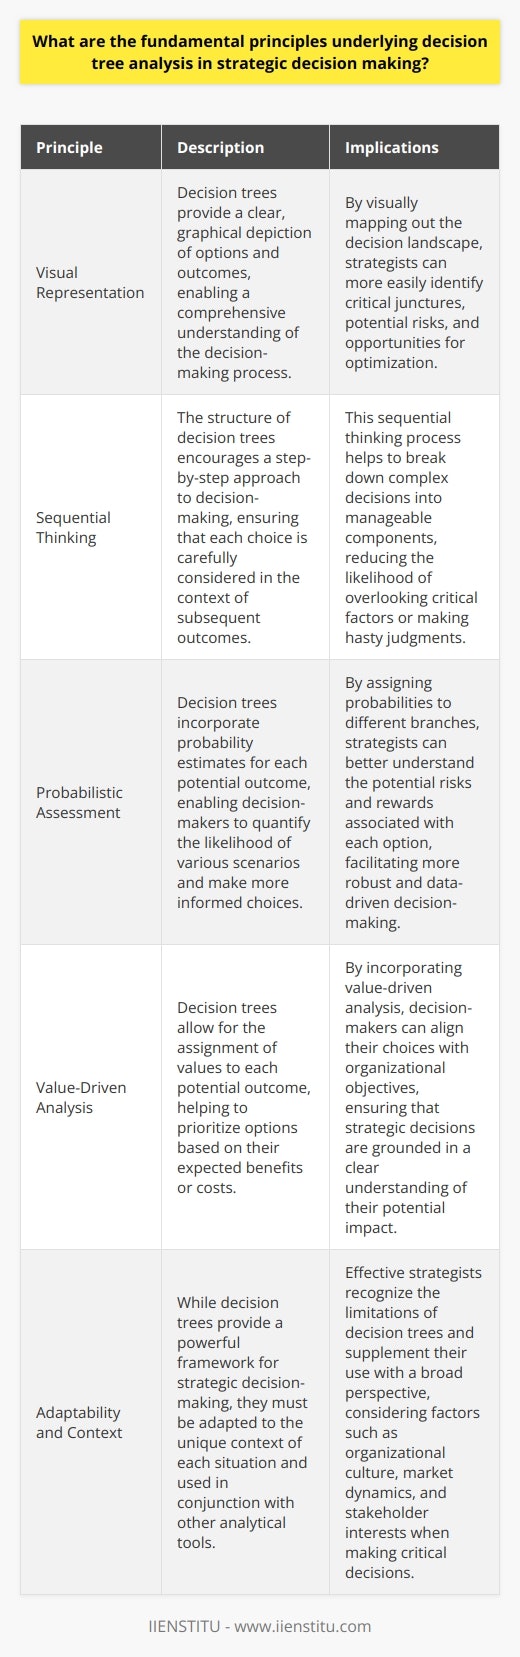 Decision Tree Analysis in Strategic Decision Making Unpacking Decision Trees Decision trees allow a visual mapping of options. They reflect a sequence of choices and outcomes. Each branch represents a potential decision or event. Trees grow complex with more branches. Strategists favor decision trees for this clarity. Core Principles of Decision Trees      Utilizing Decision Trees Effectively     Decision trees guide through strategic fog with clarity. They demand sequential thought and value accuracy. Their visual nature simplifies the complex. Yet, they are but one tool in the decision-makers kit. Adaptation and broad perspective enrich their use.